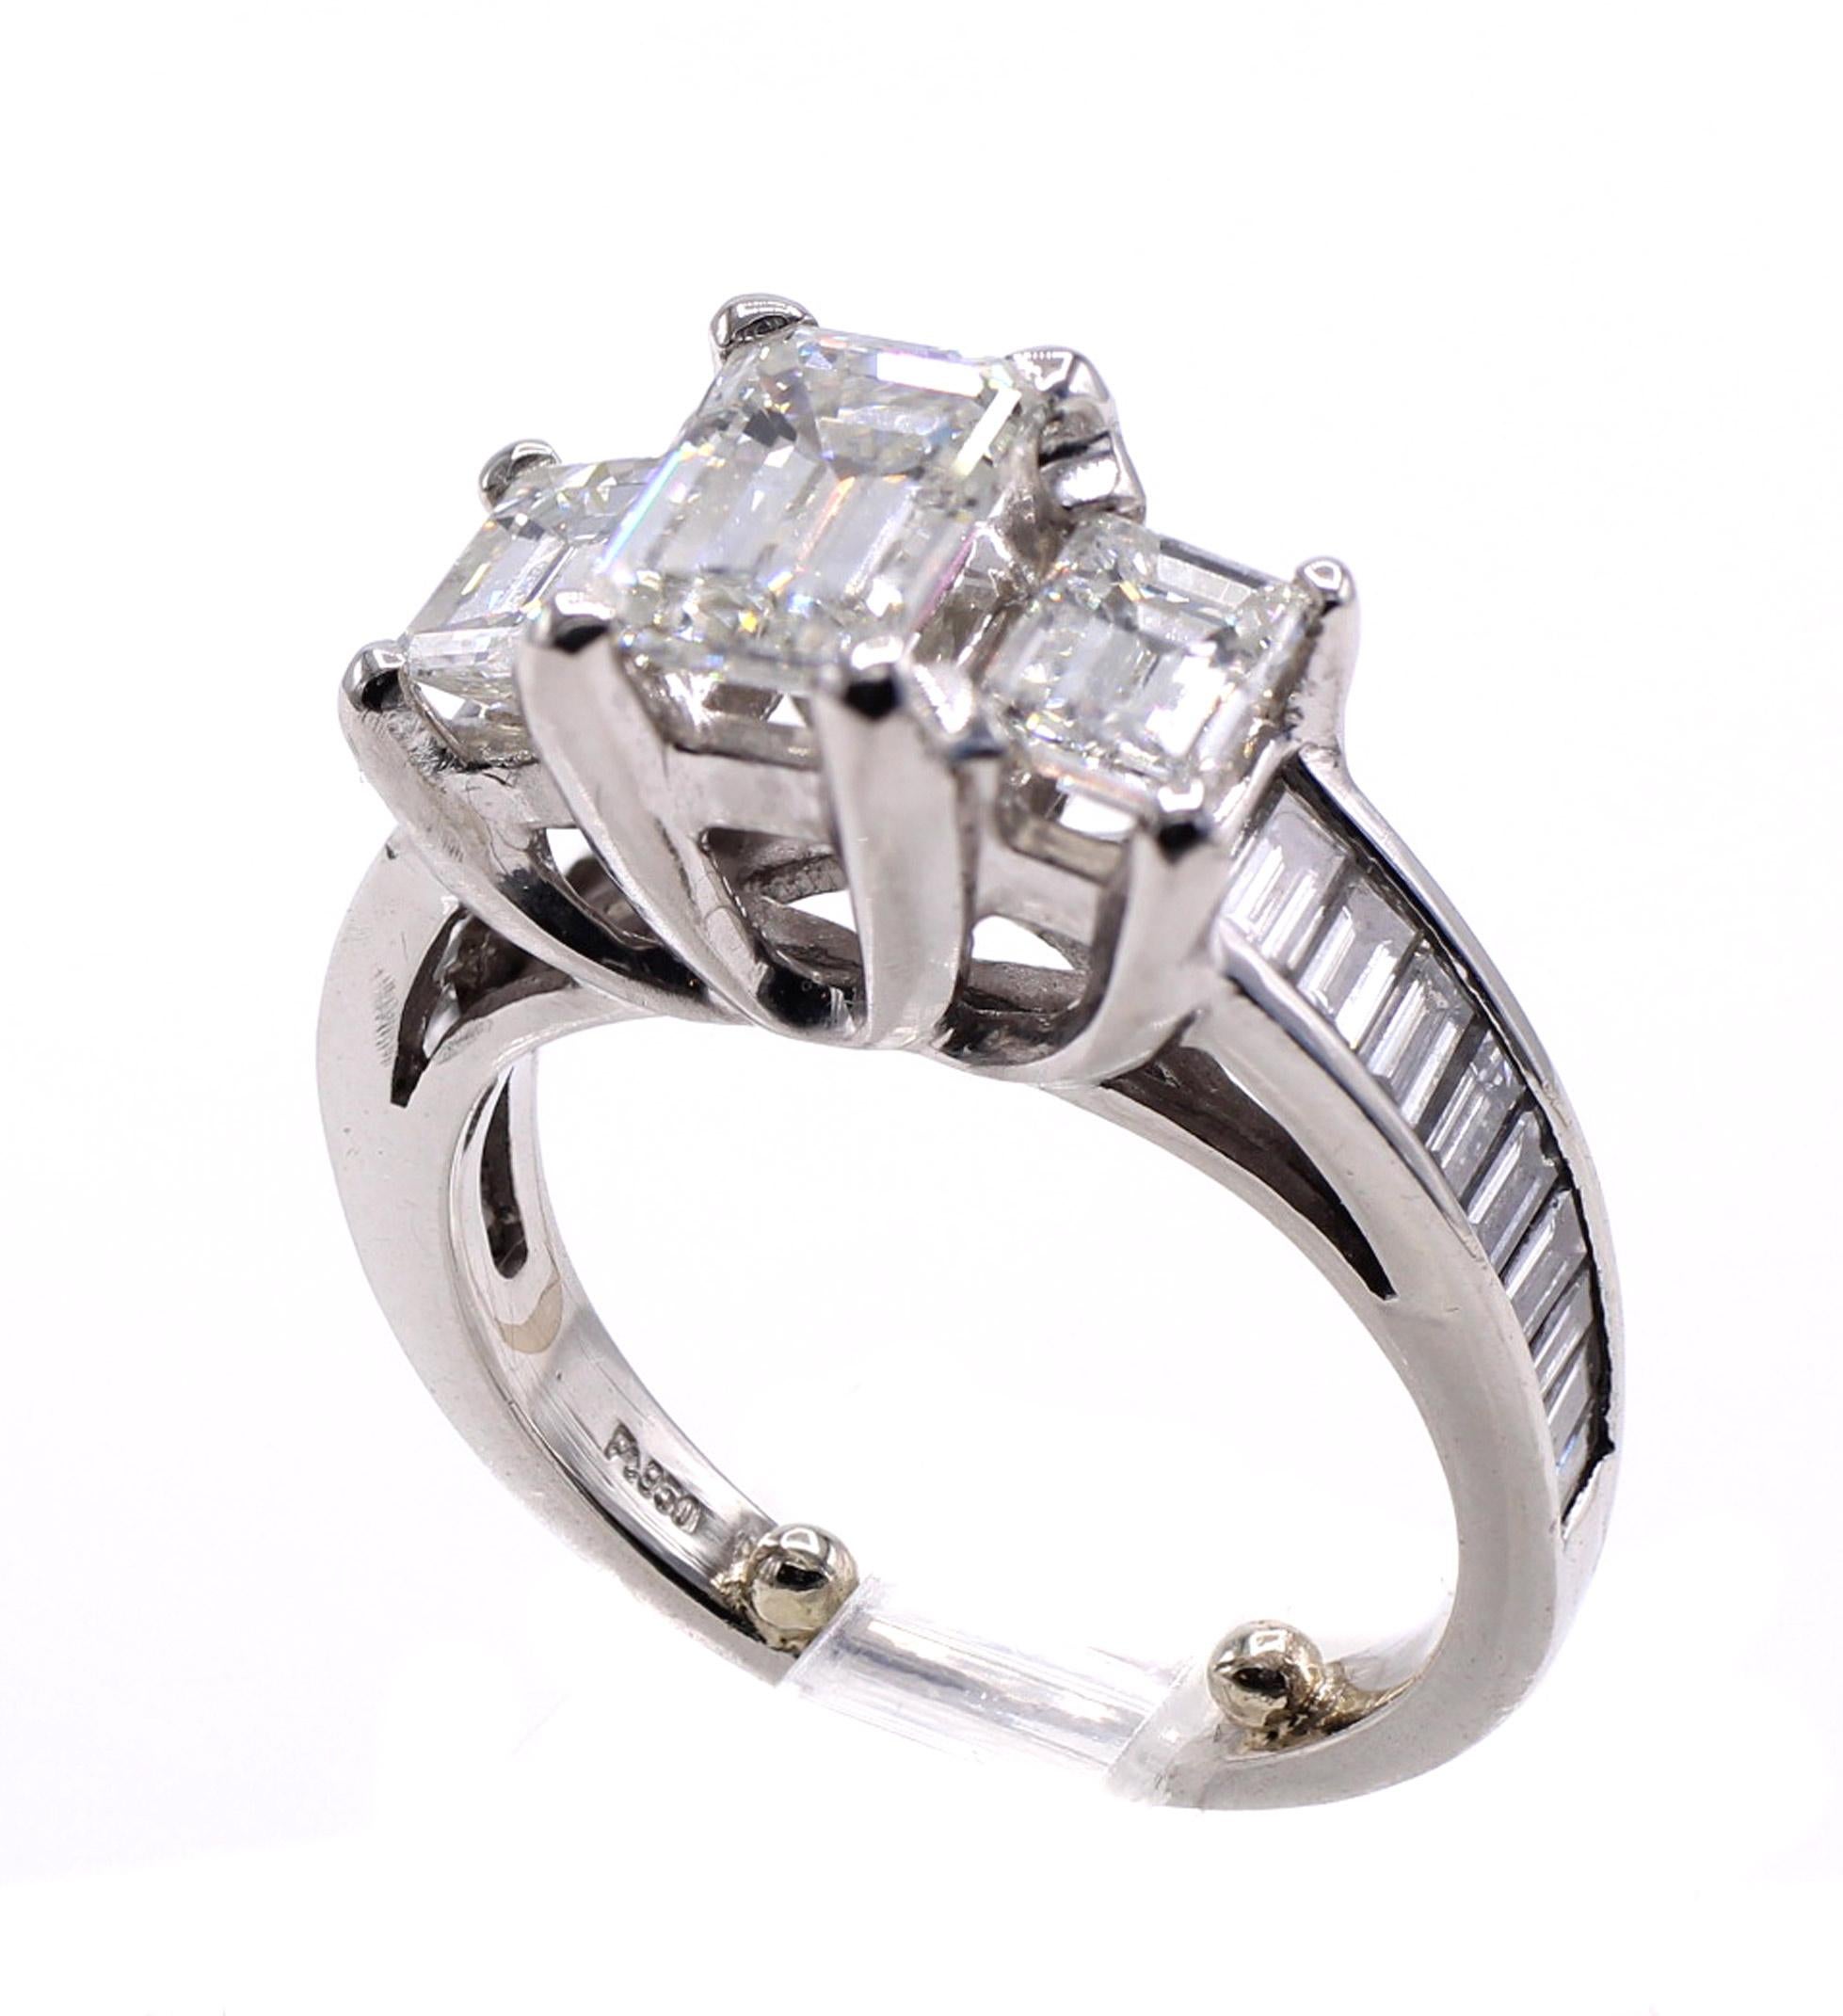 Beautifully designed and masterfully handcrafted this platinum 3 stone diamond ring features a perfectly proportioned emerald cut diamond weighing 1.12 carats. Flanked on each shoulder by 2 perfectly matched emerald cut diamonds weighing a total of